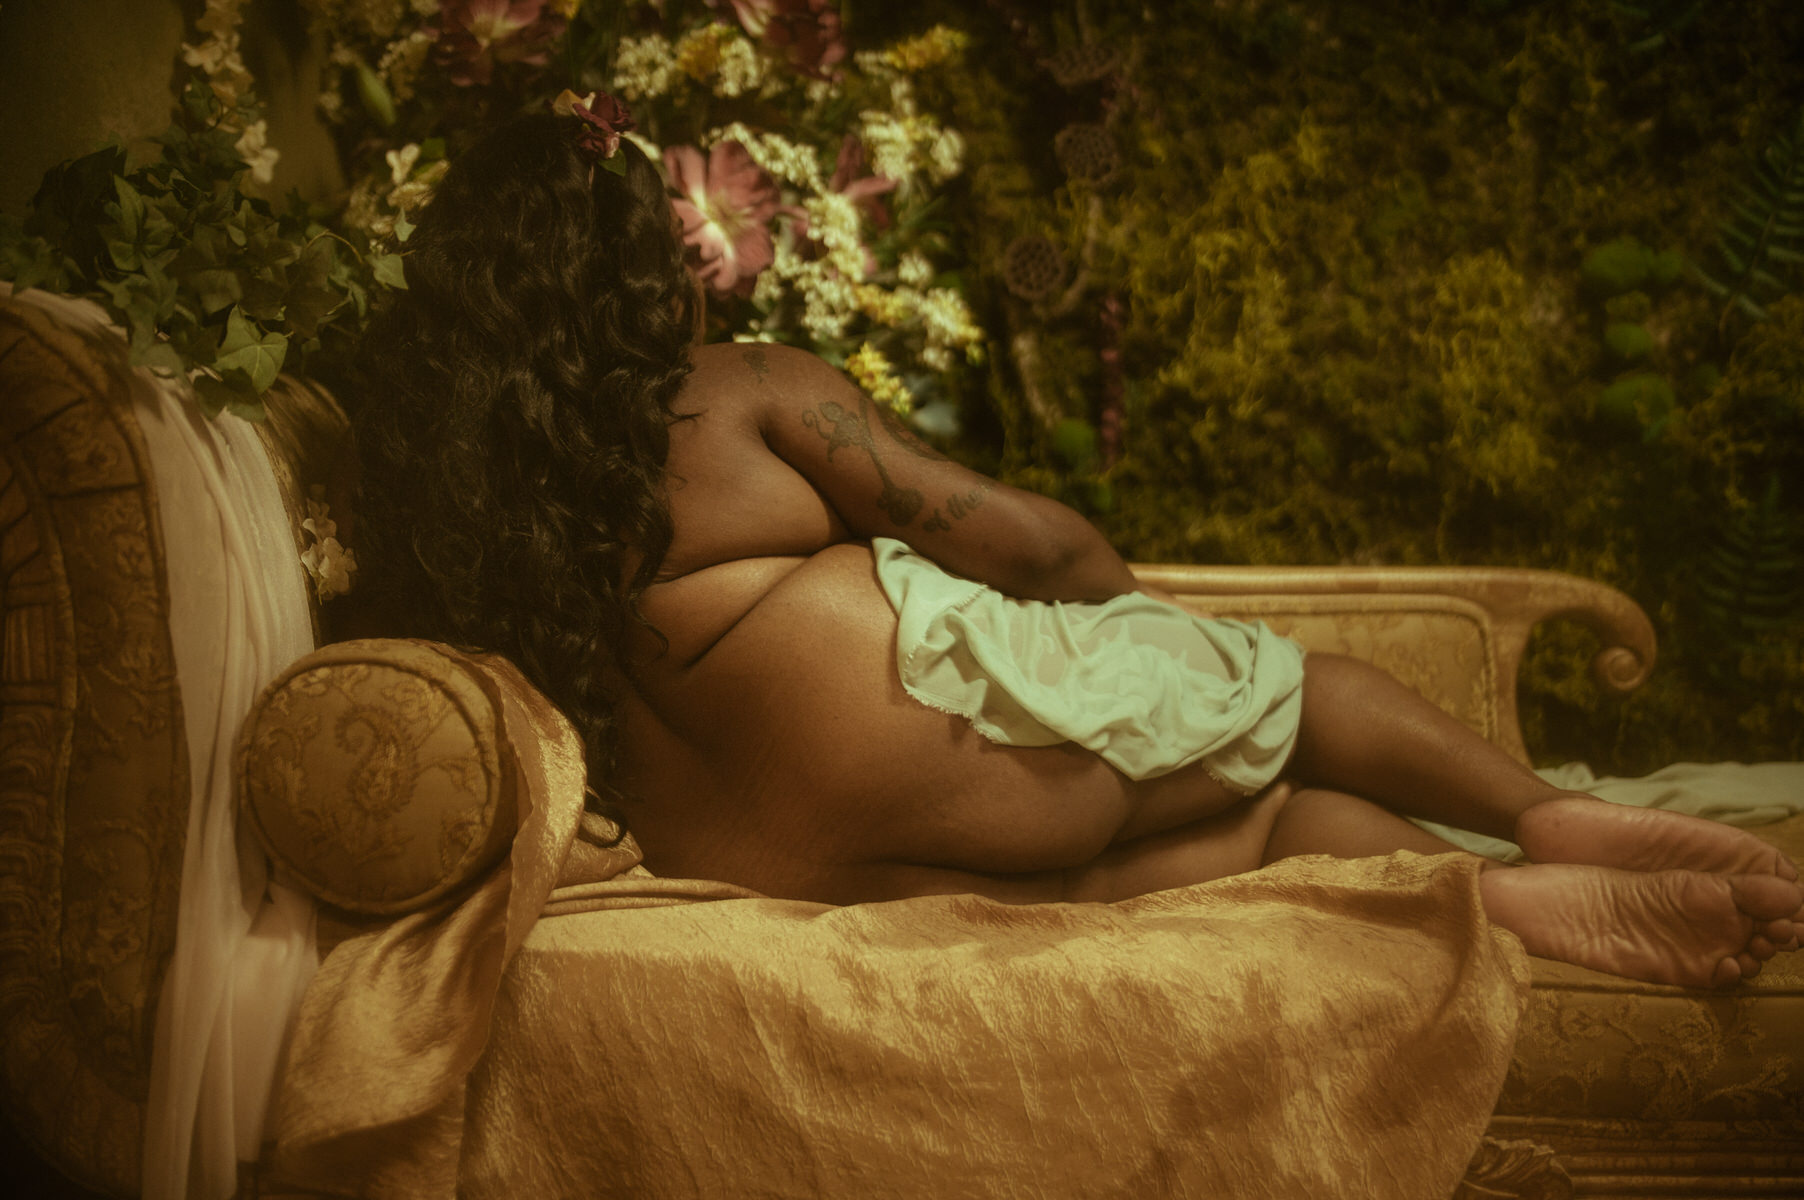 A nude woman sitting on a couch in front of flowers.